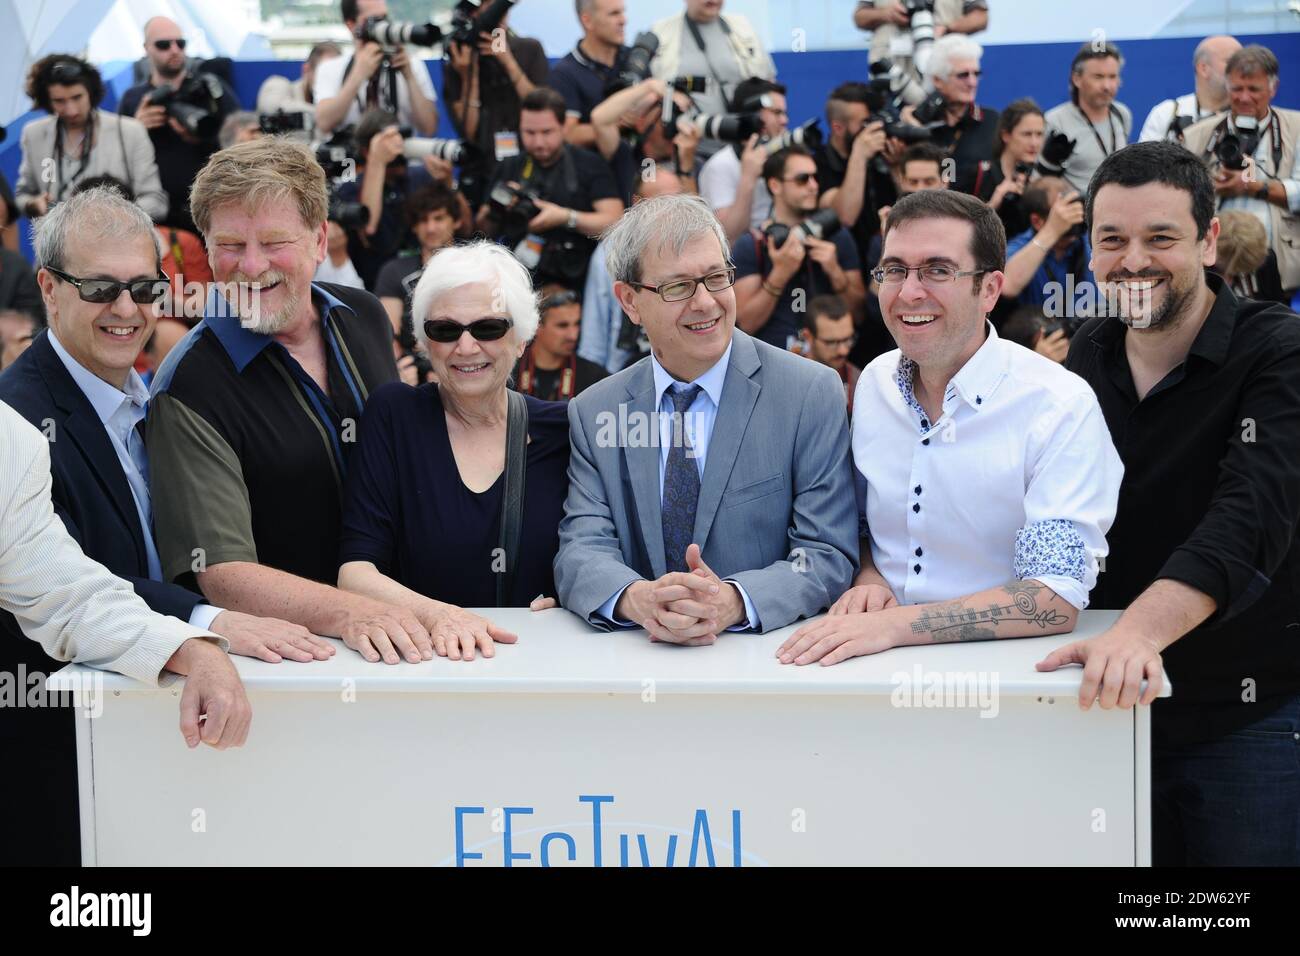 Roger Allers, Tomm Moore, Joan C Gratz, Joan Sfar, Bill Plympton, Paul Brizzi, Gaetan Brizzi posing at Homage To The Cinema D'Animation photocall held at the Palais Des Festivals in Cannes, France on May 17, 2014, as part of the 67th Cannes Film Festival. Photo by Aurore Marechal/ABACAPRESS.COM Stock Photo